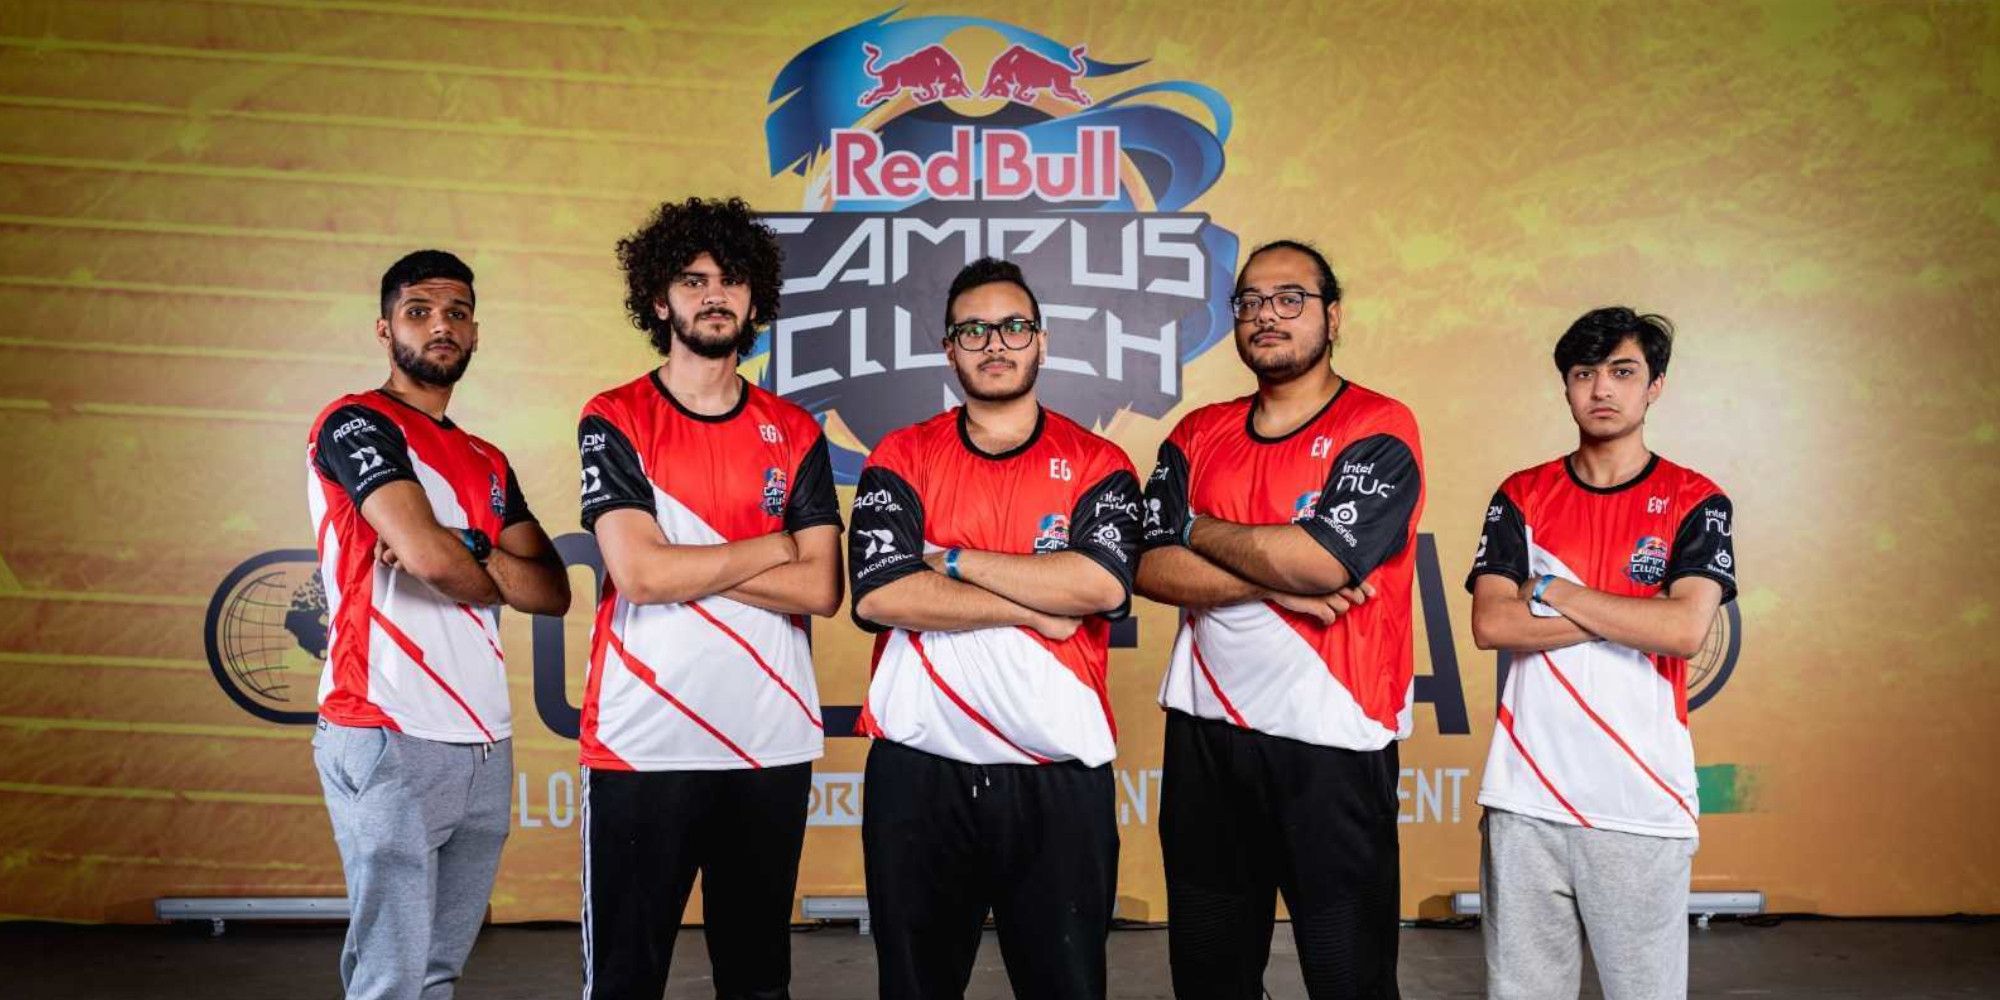 bravado team from egypt standing with arms folded in front of the red bull campus clutch logo